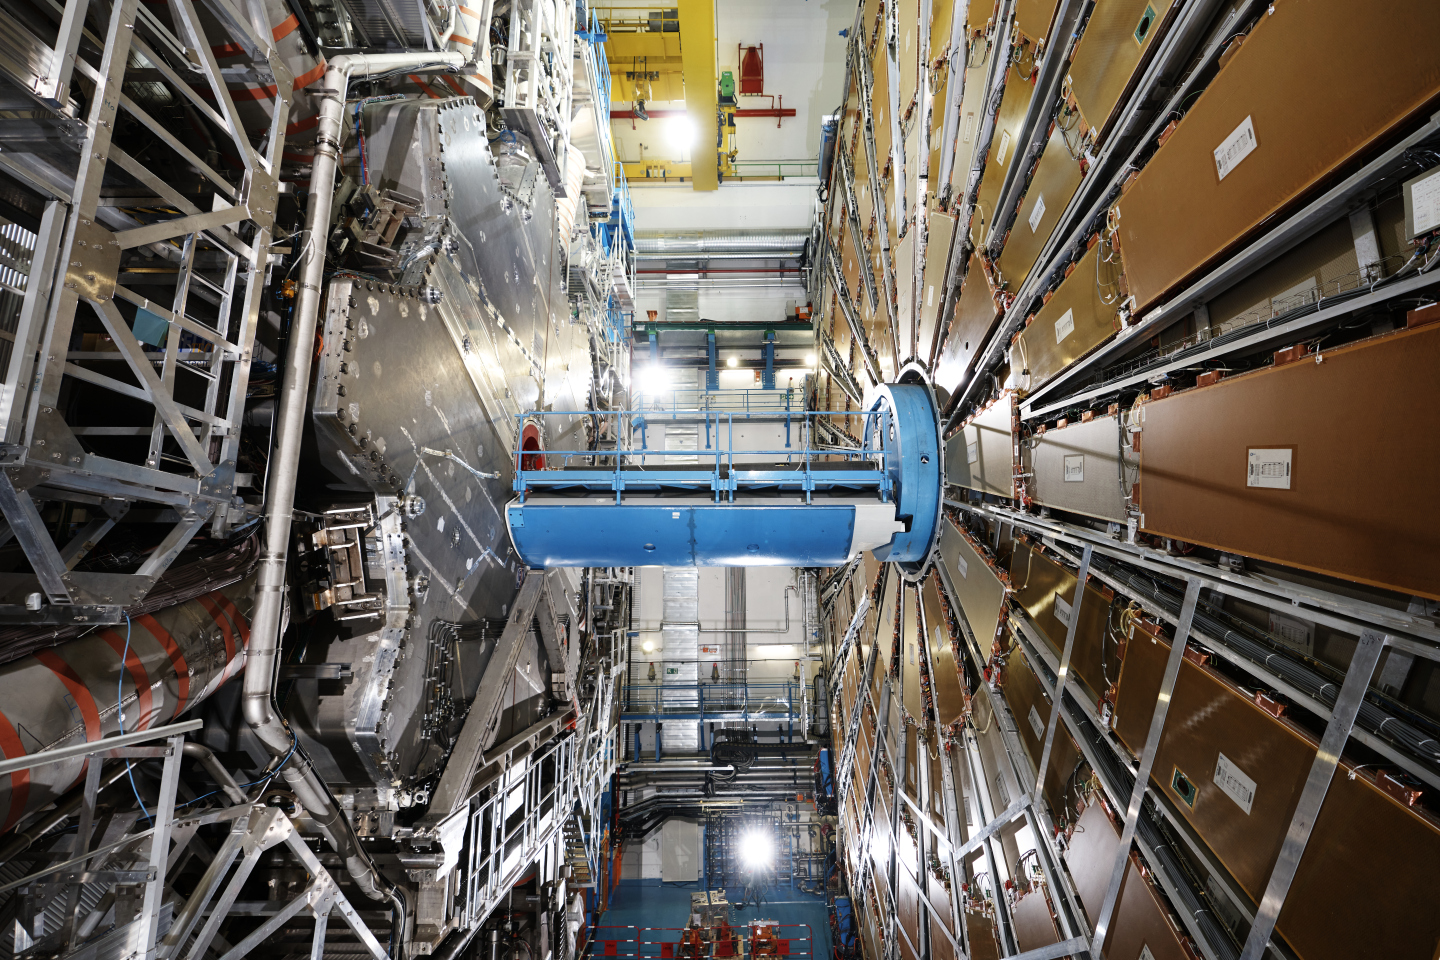 The image shows the ATLAS detector